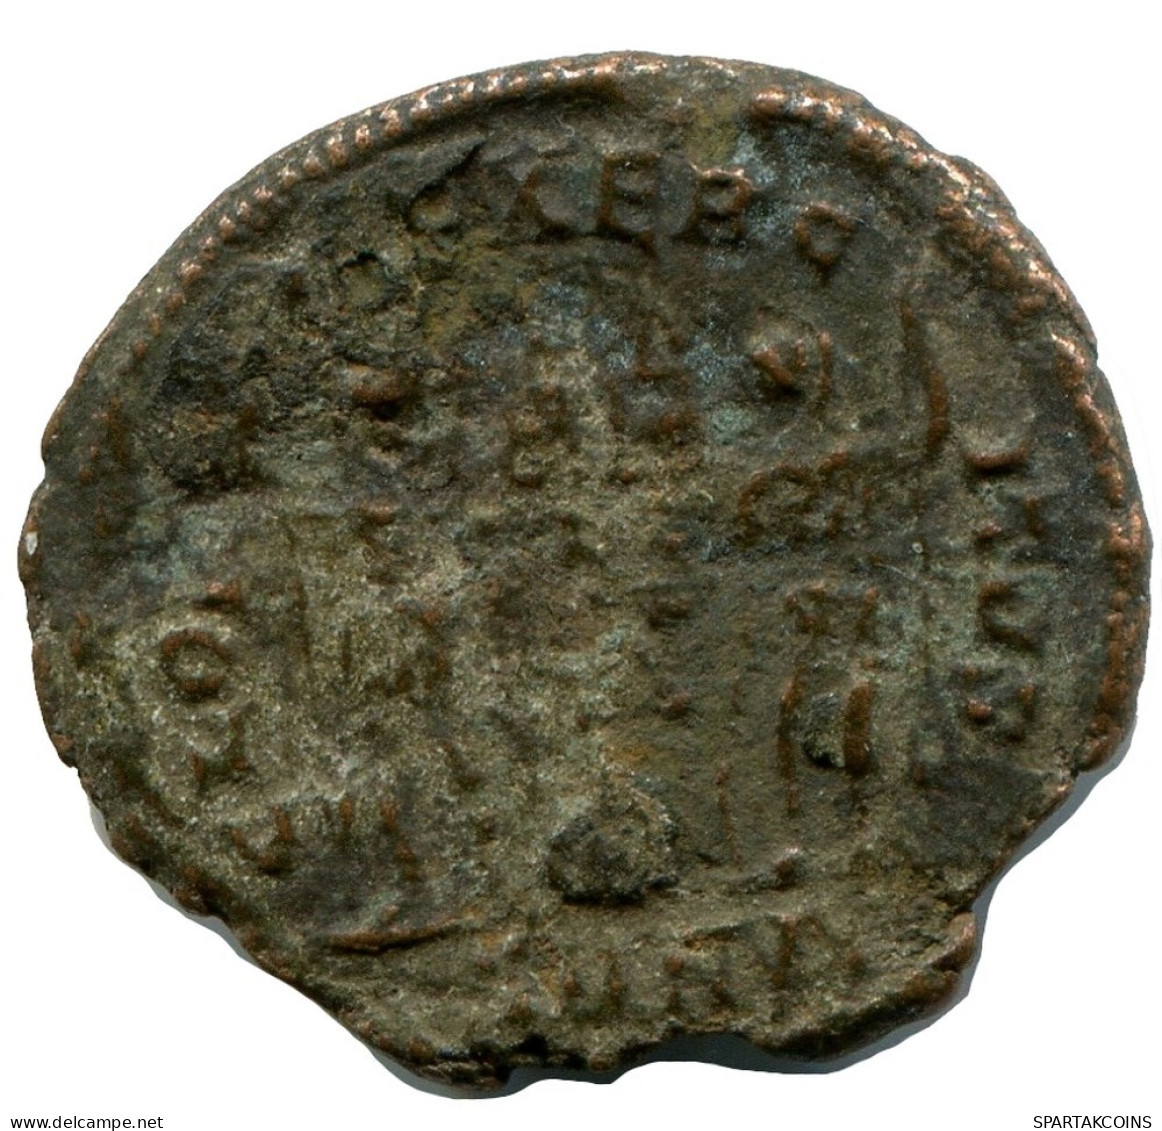 CONSTANTINE I MINTED IN ANTIOCH FOUND IN IHNASYAH HOARD EGYPT #ANC10640.14.U.A - The Christian Empire (307 AD To 363 AD)